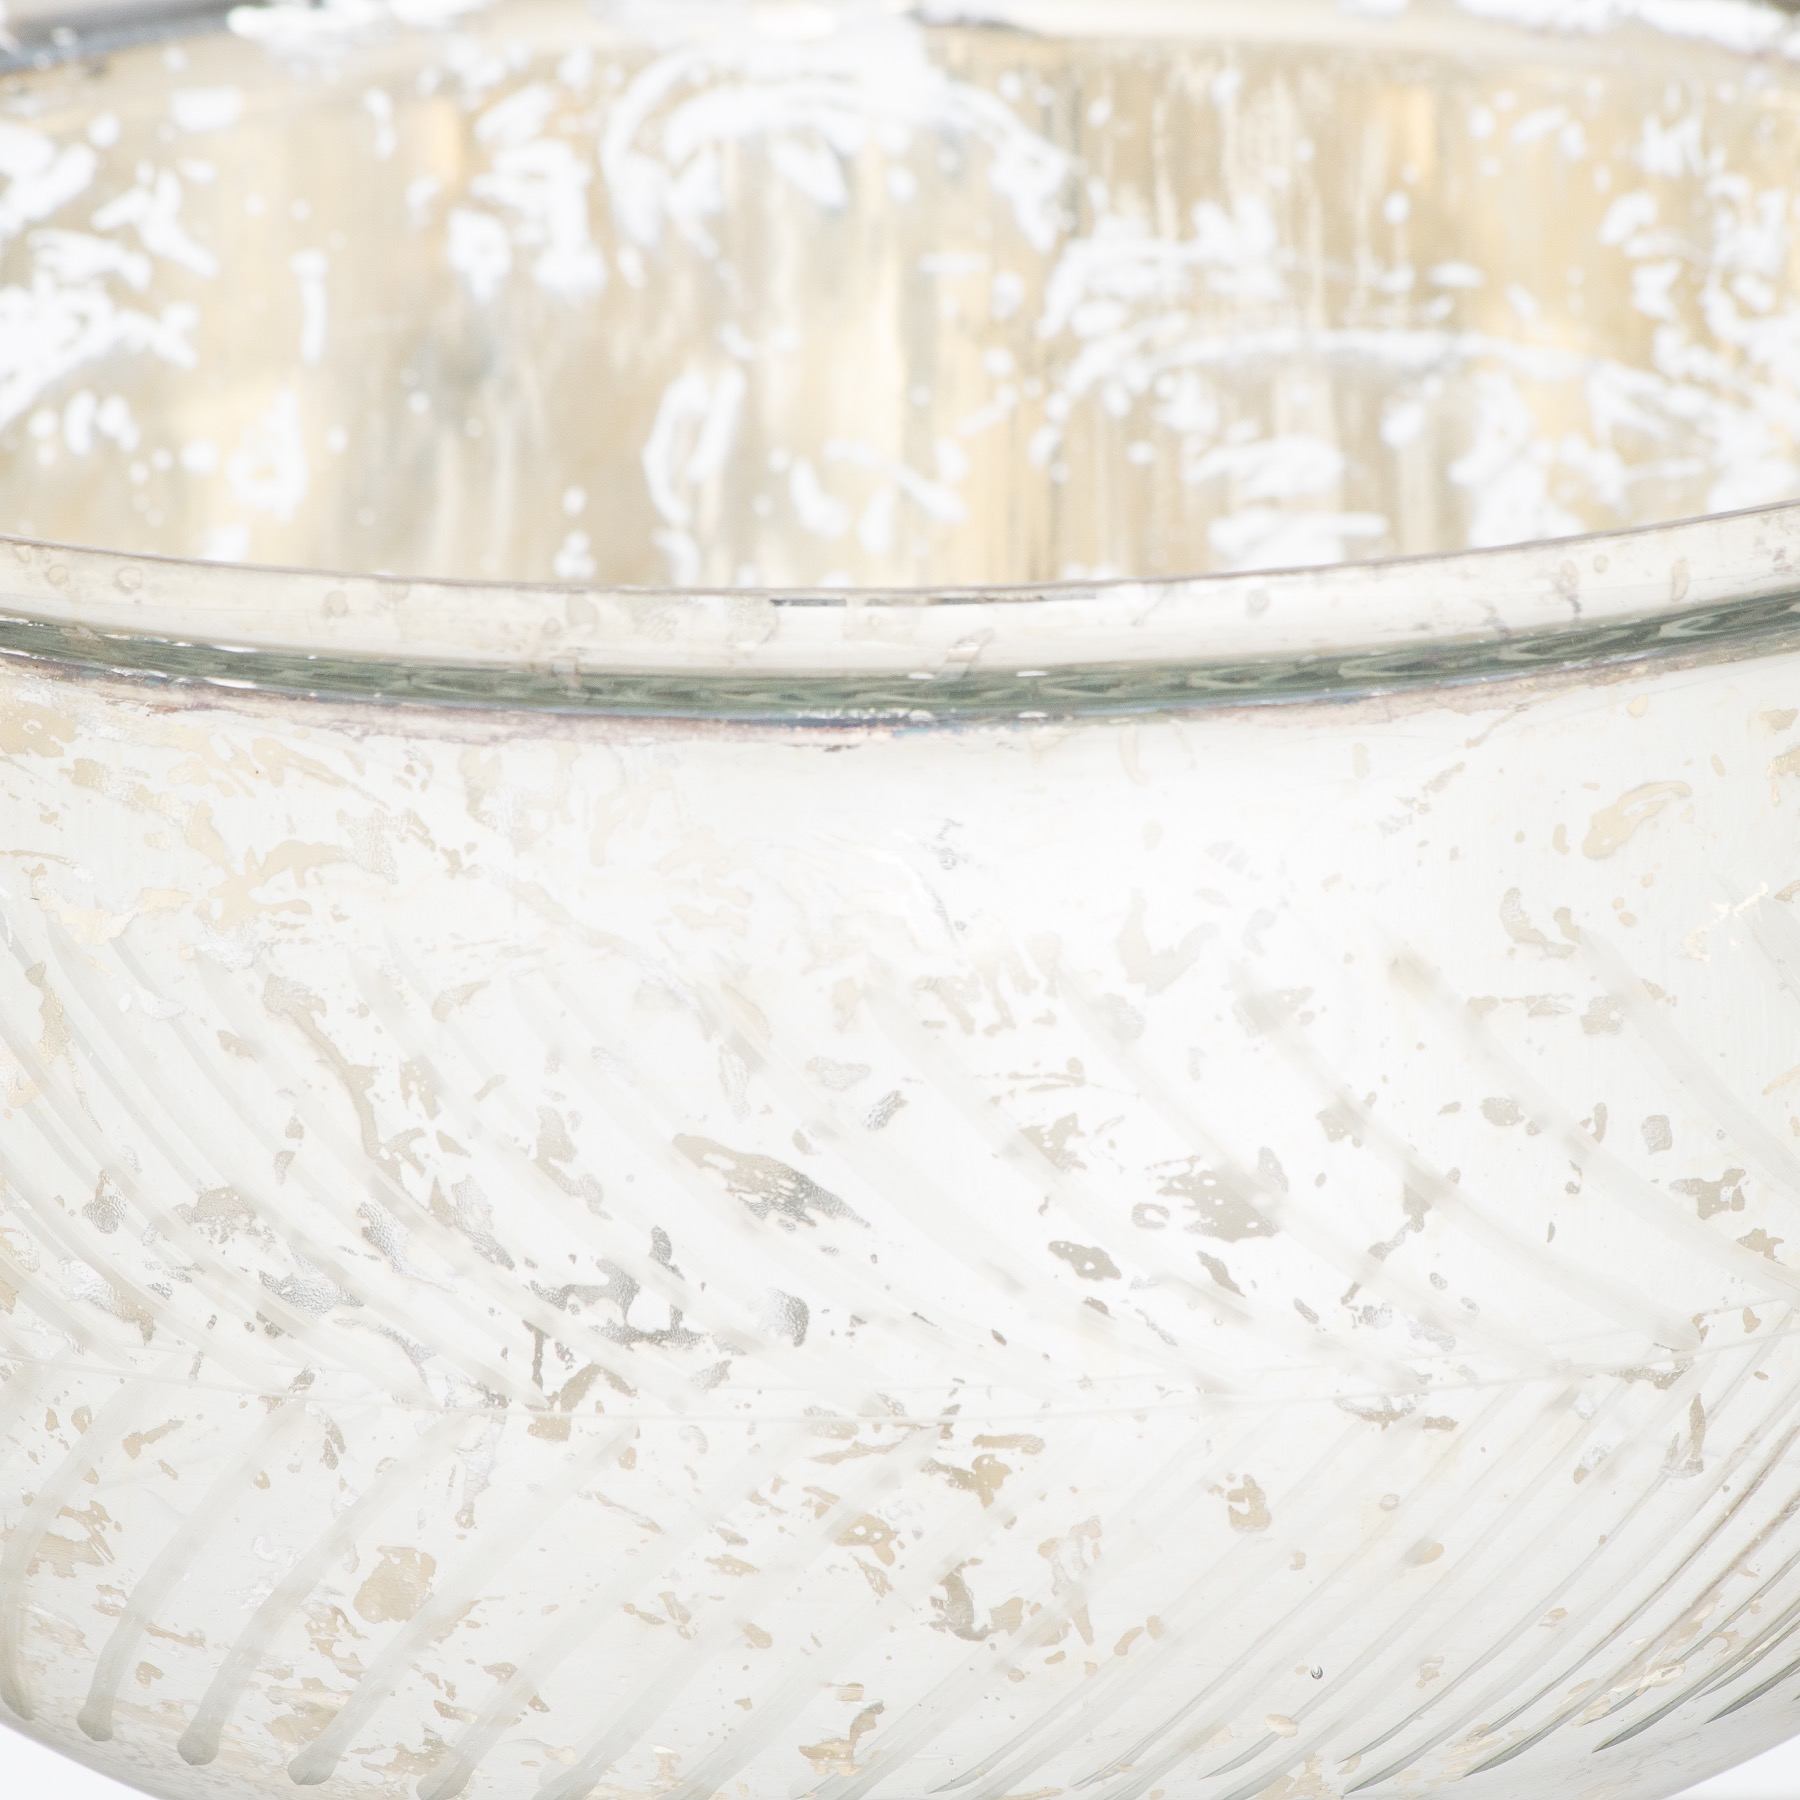 The Lustre Silver Glass Decorative Extra Large Footed Bowl - Image 2